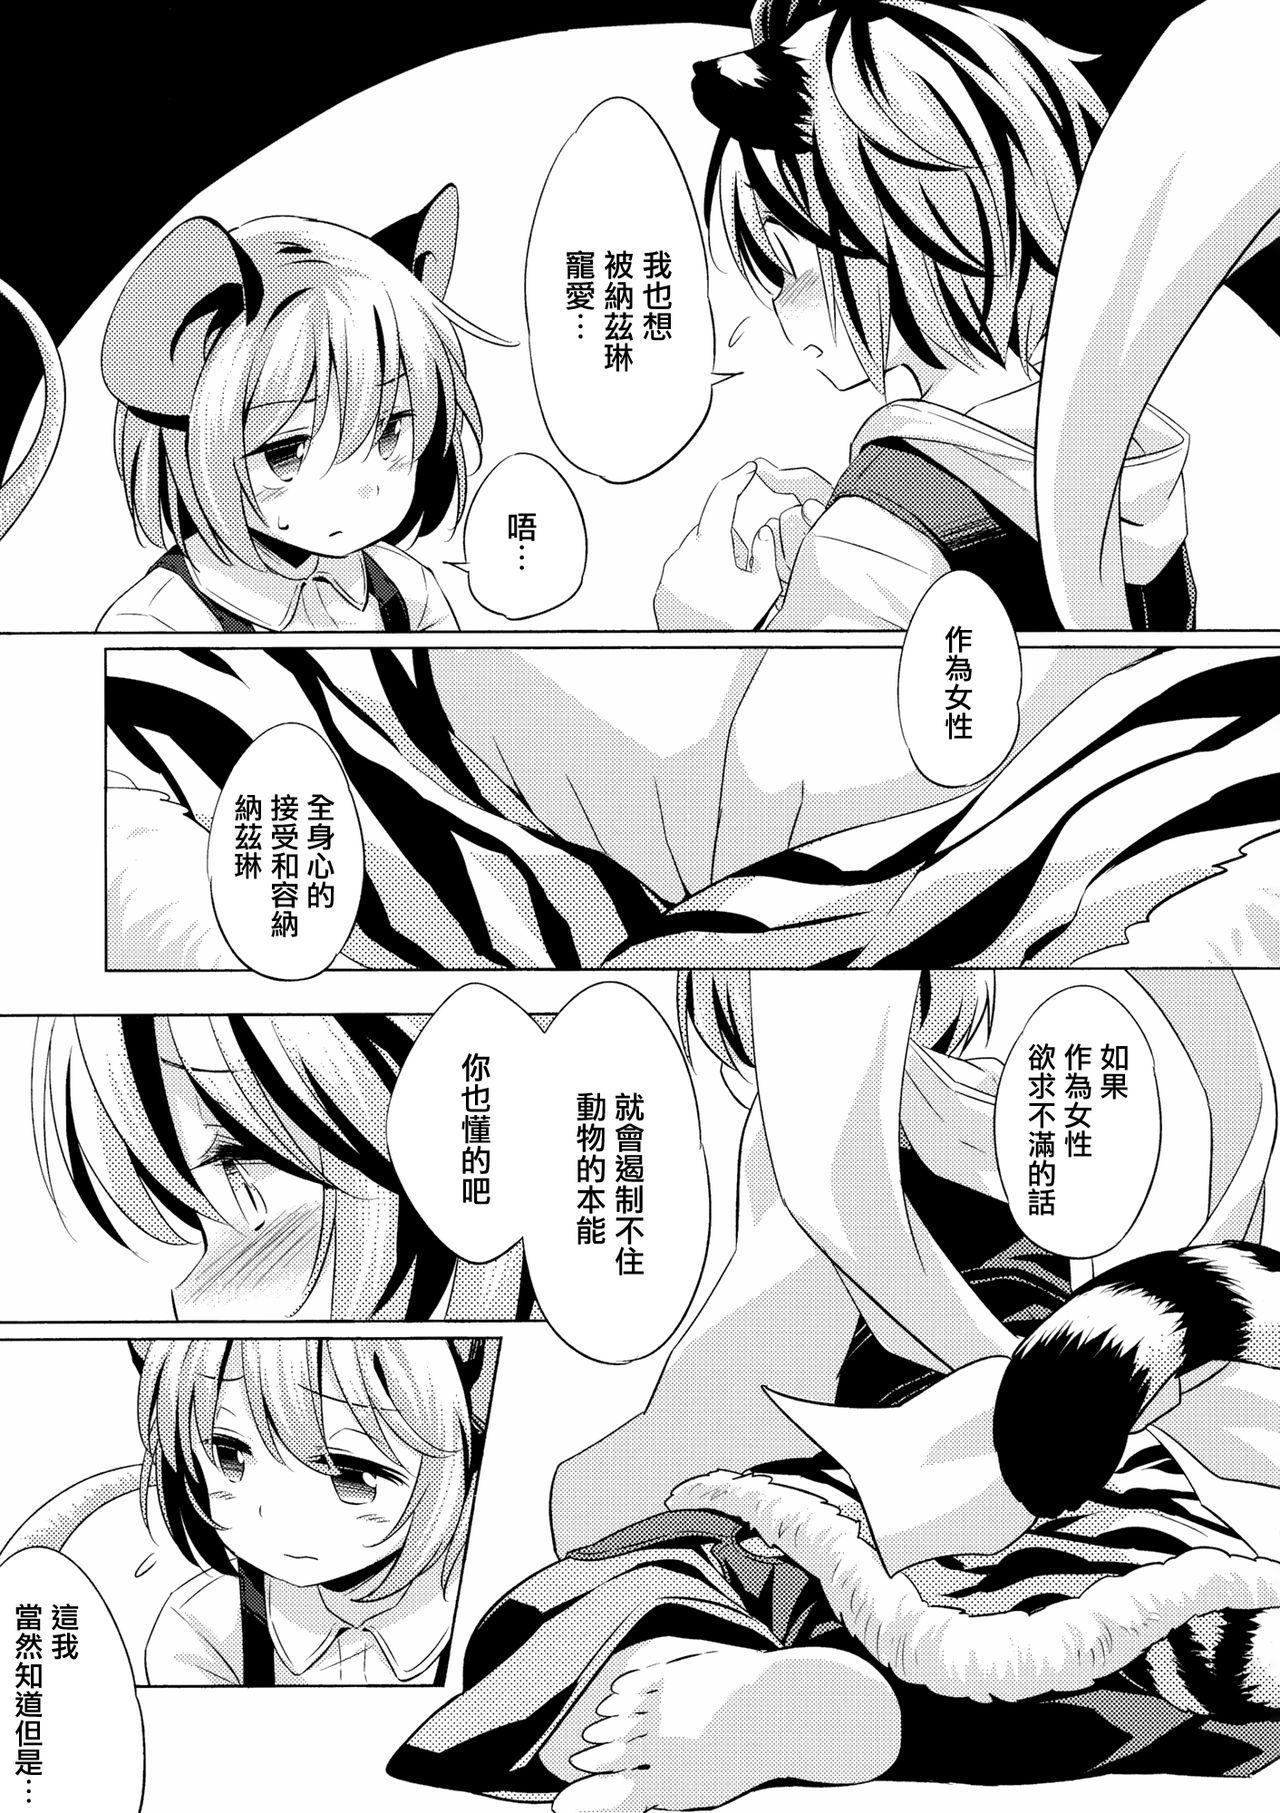 Shecock Toramaru Passion - Touhou project Missionary Position Porn - Page 6